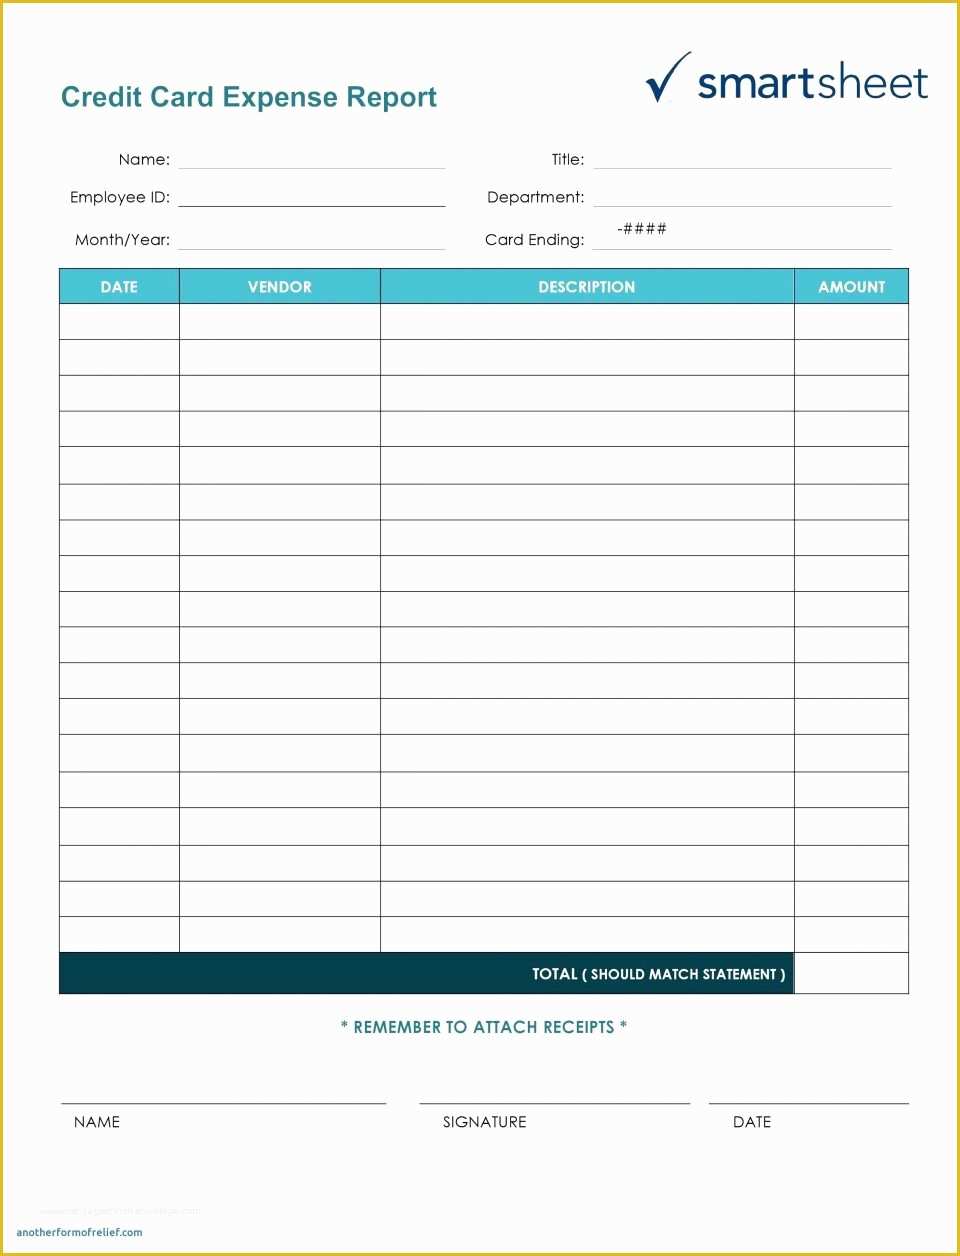 Free Home Inspection Report Template Word Of Microsoft Word Inspectiont Template format Roof Property